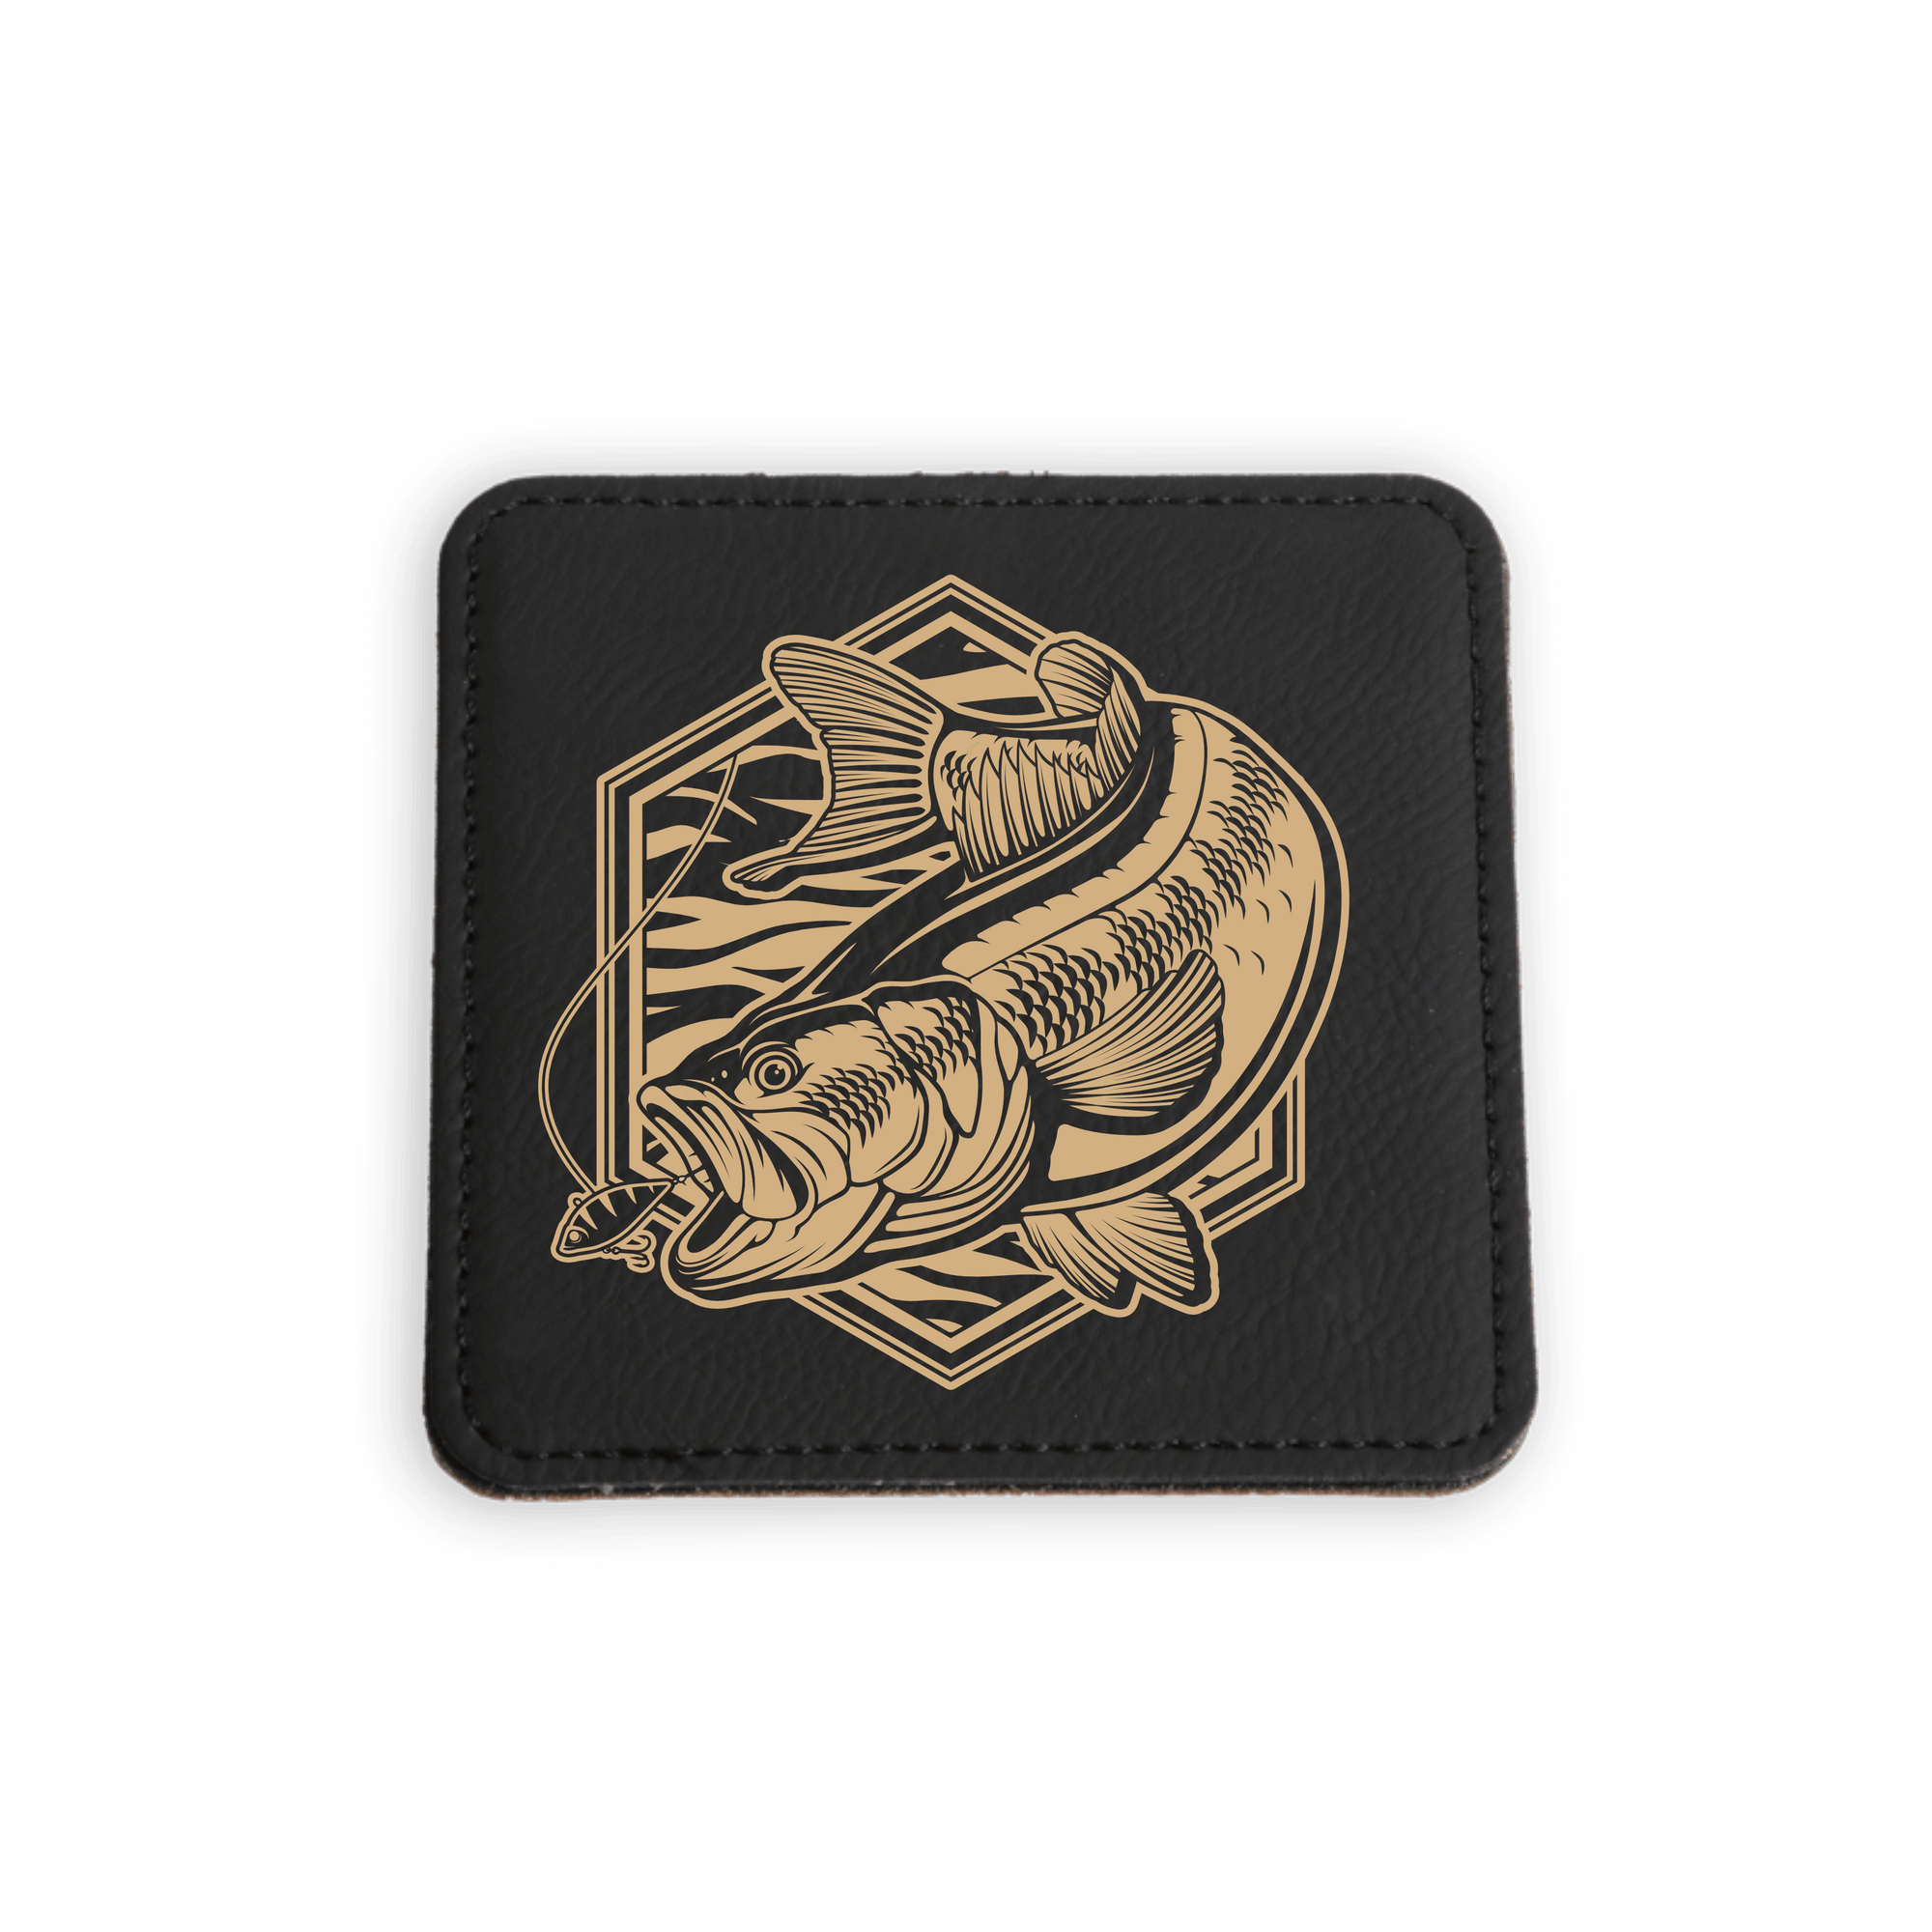 Set of 6 leather bass fishing coasters, color shown here is black leather with gold laser engraved bass art by Joel Jensen Art design